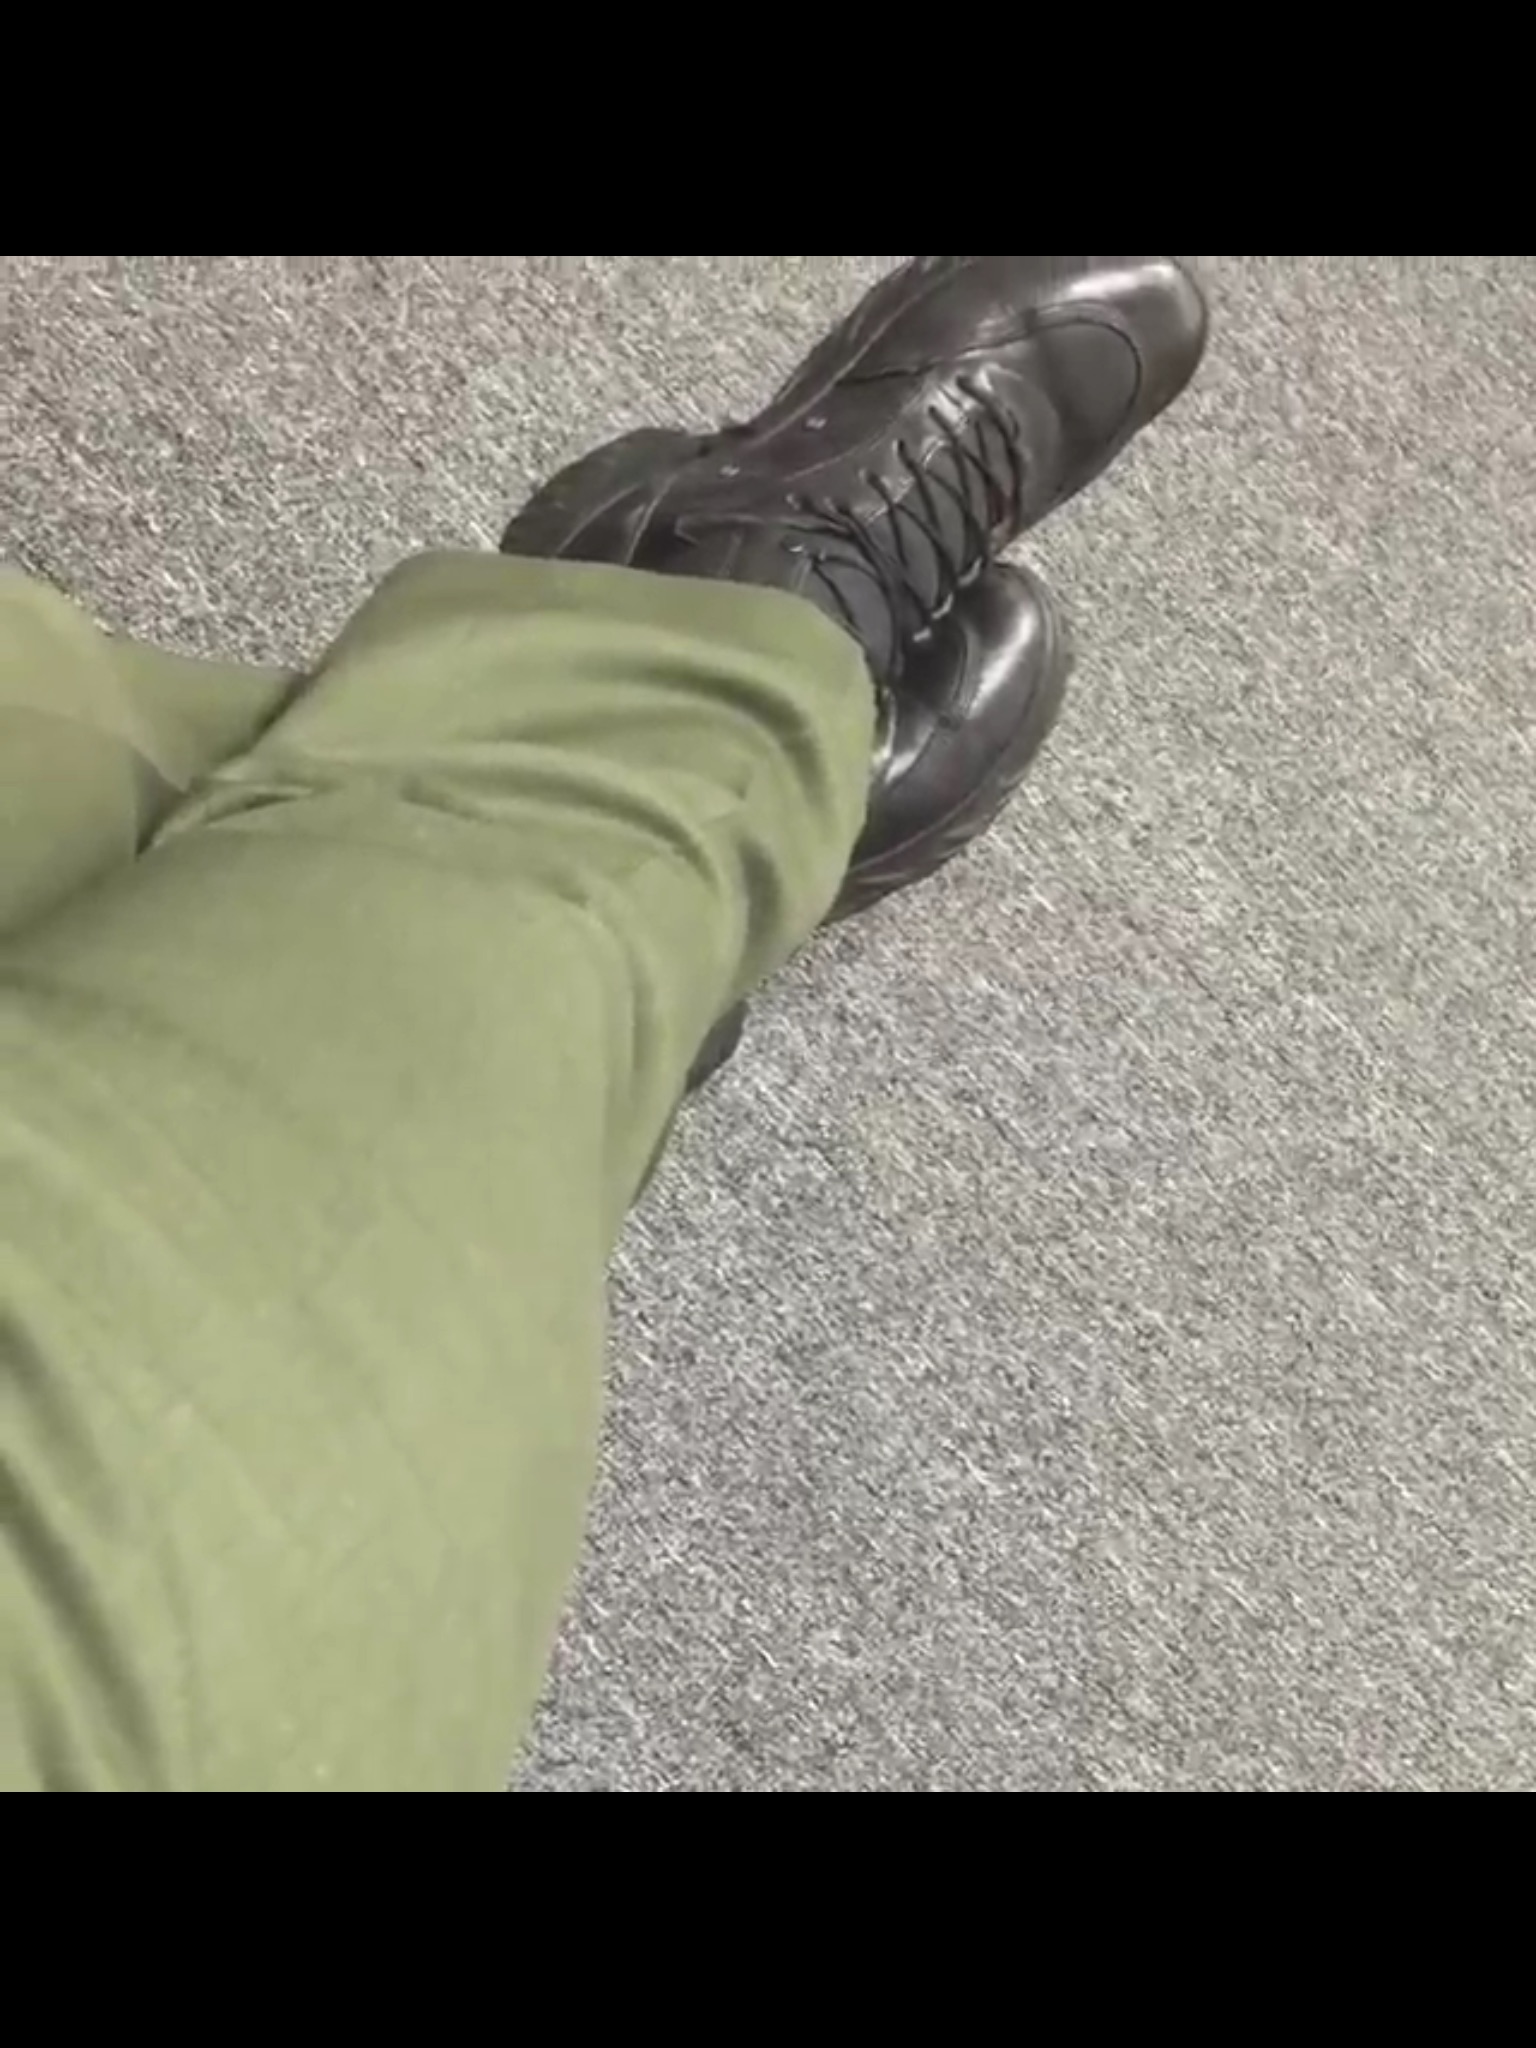 Candid Video Cop's Boots